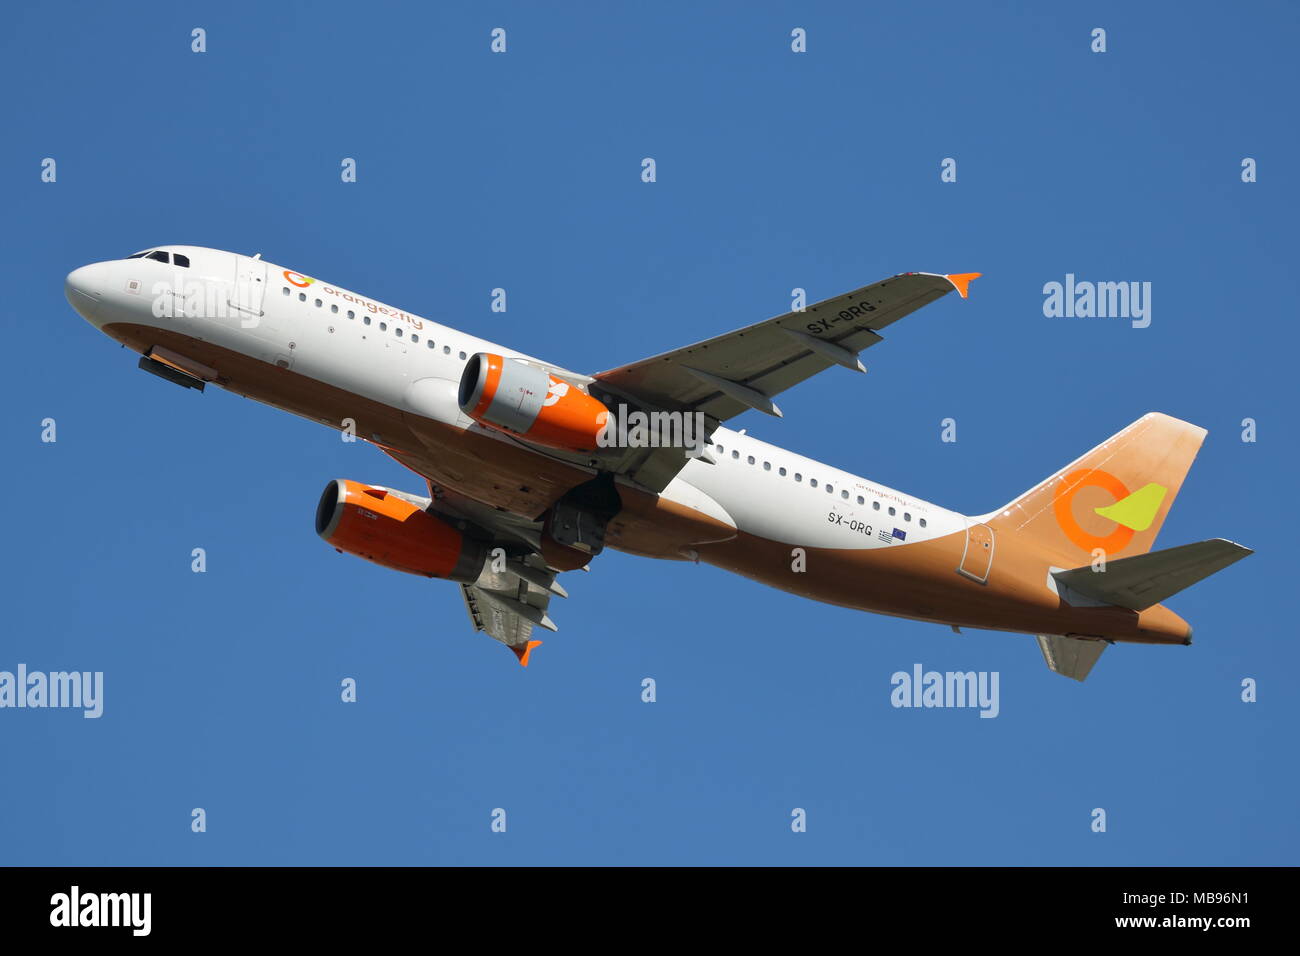 Orange2fly Airbus A320 SX-ORG departing from London Heathrow Airport, UK Stock Photo